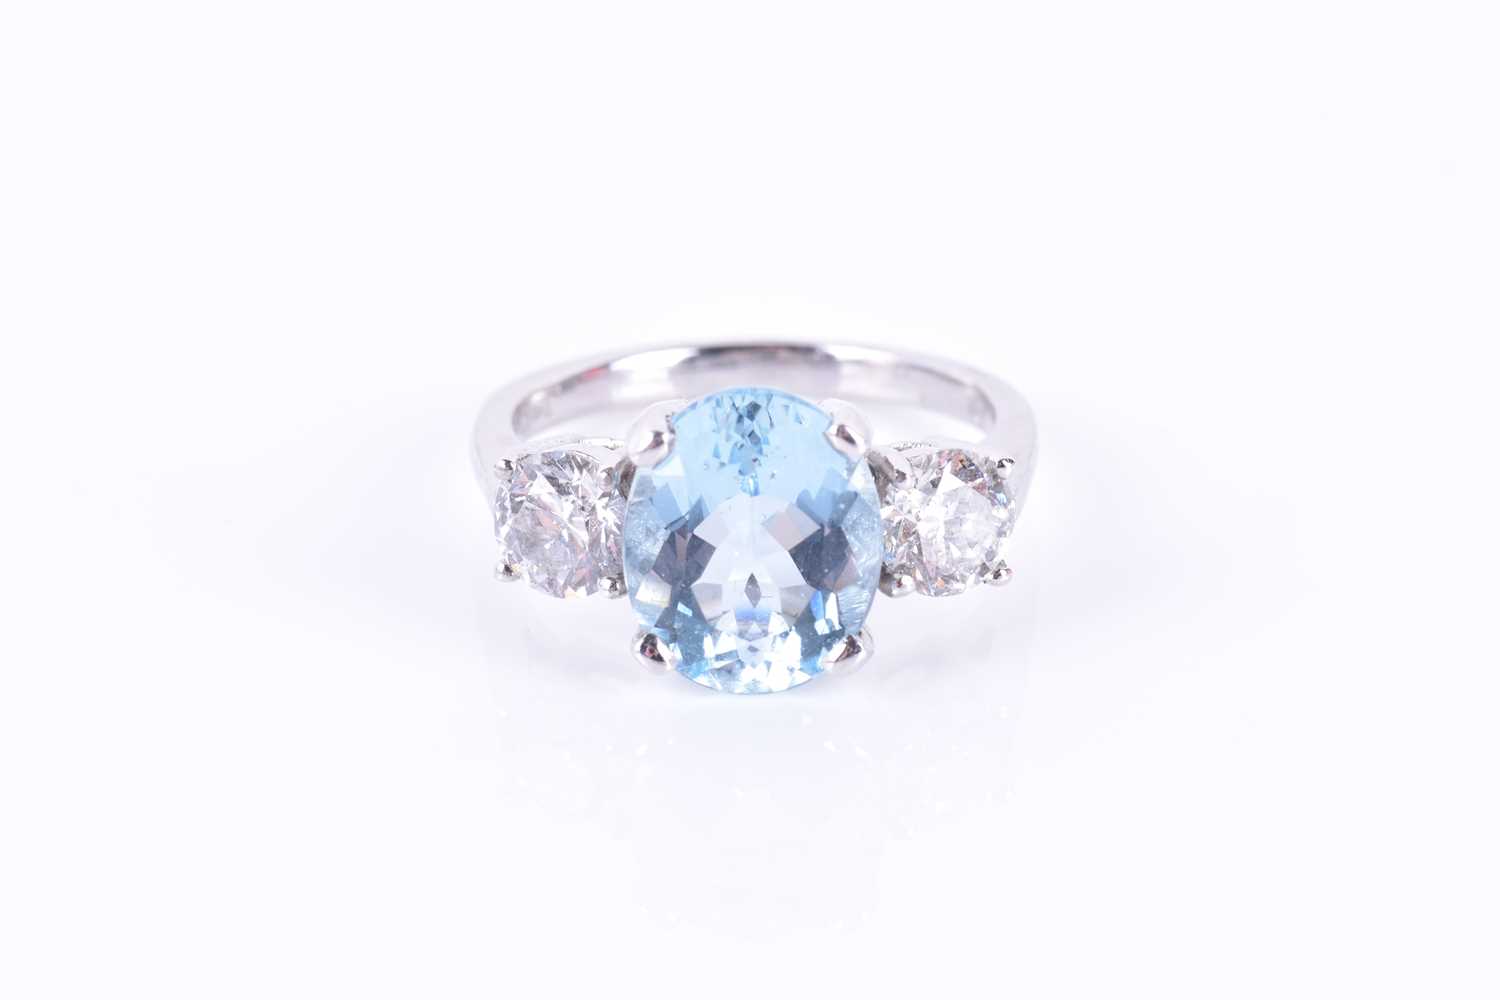 A platinum, diamond, and aquamarine ringset with a mixed oval-cut aquamarine of approximately 3.0